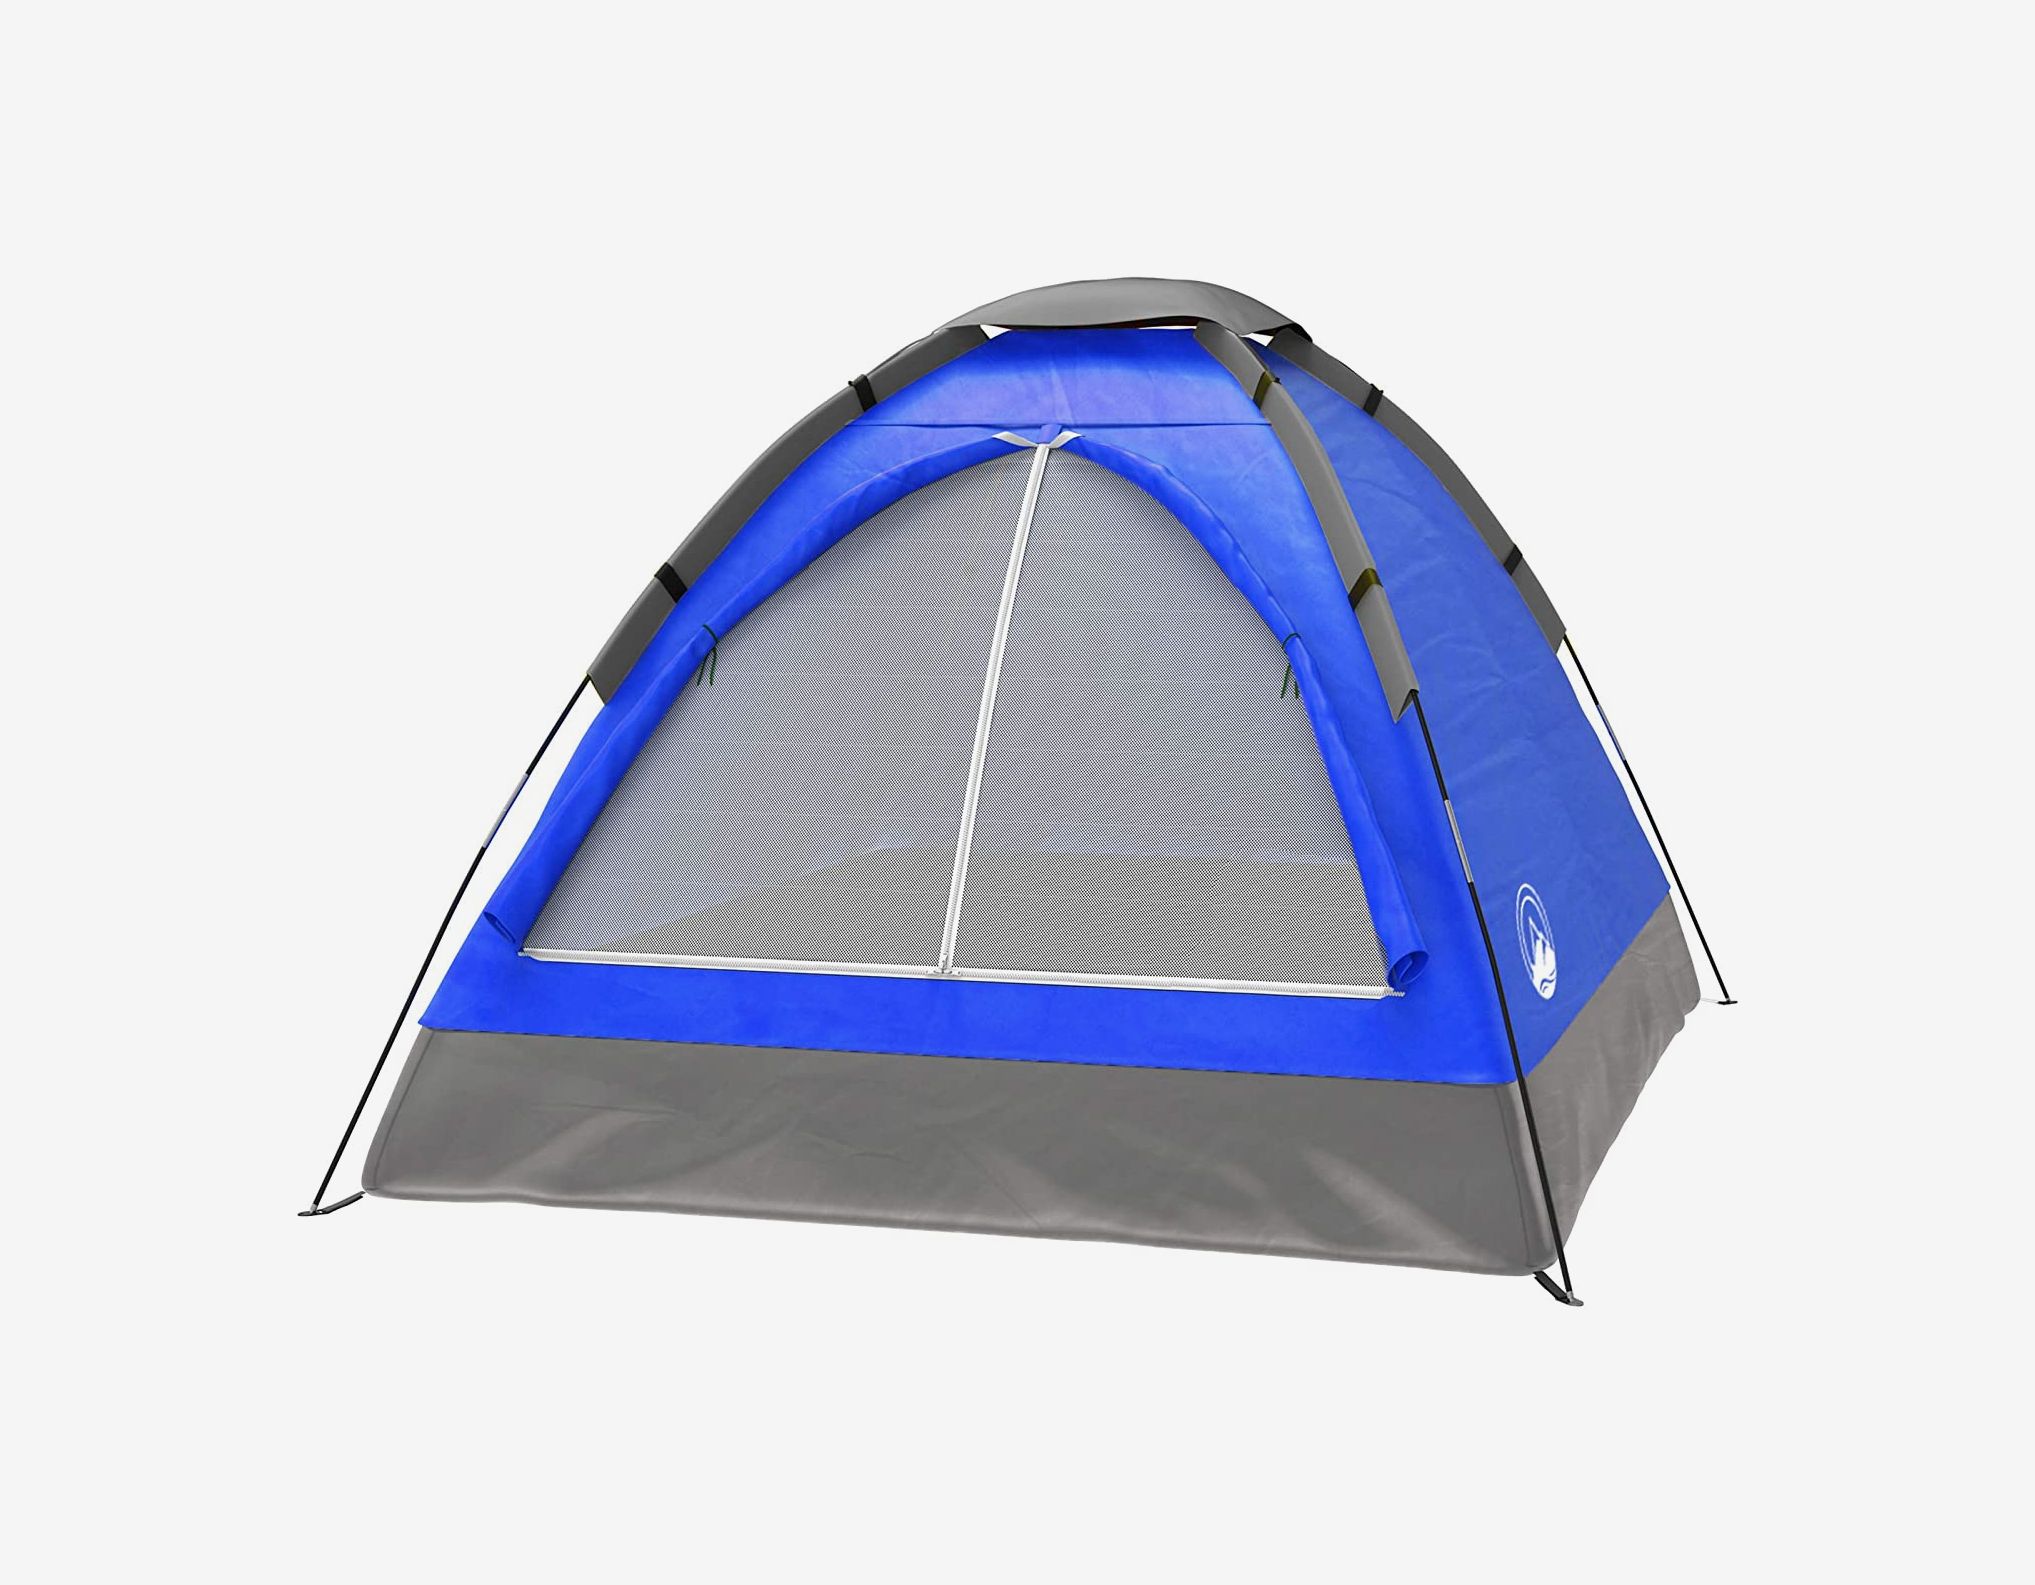 Durable Dome Tent Comfy Outdoor Camping Freestanding Tunnel Tent Roll Up Fly 